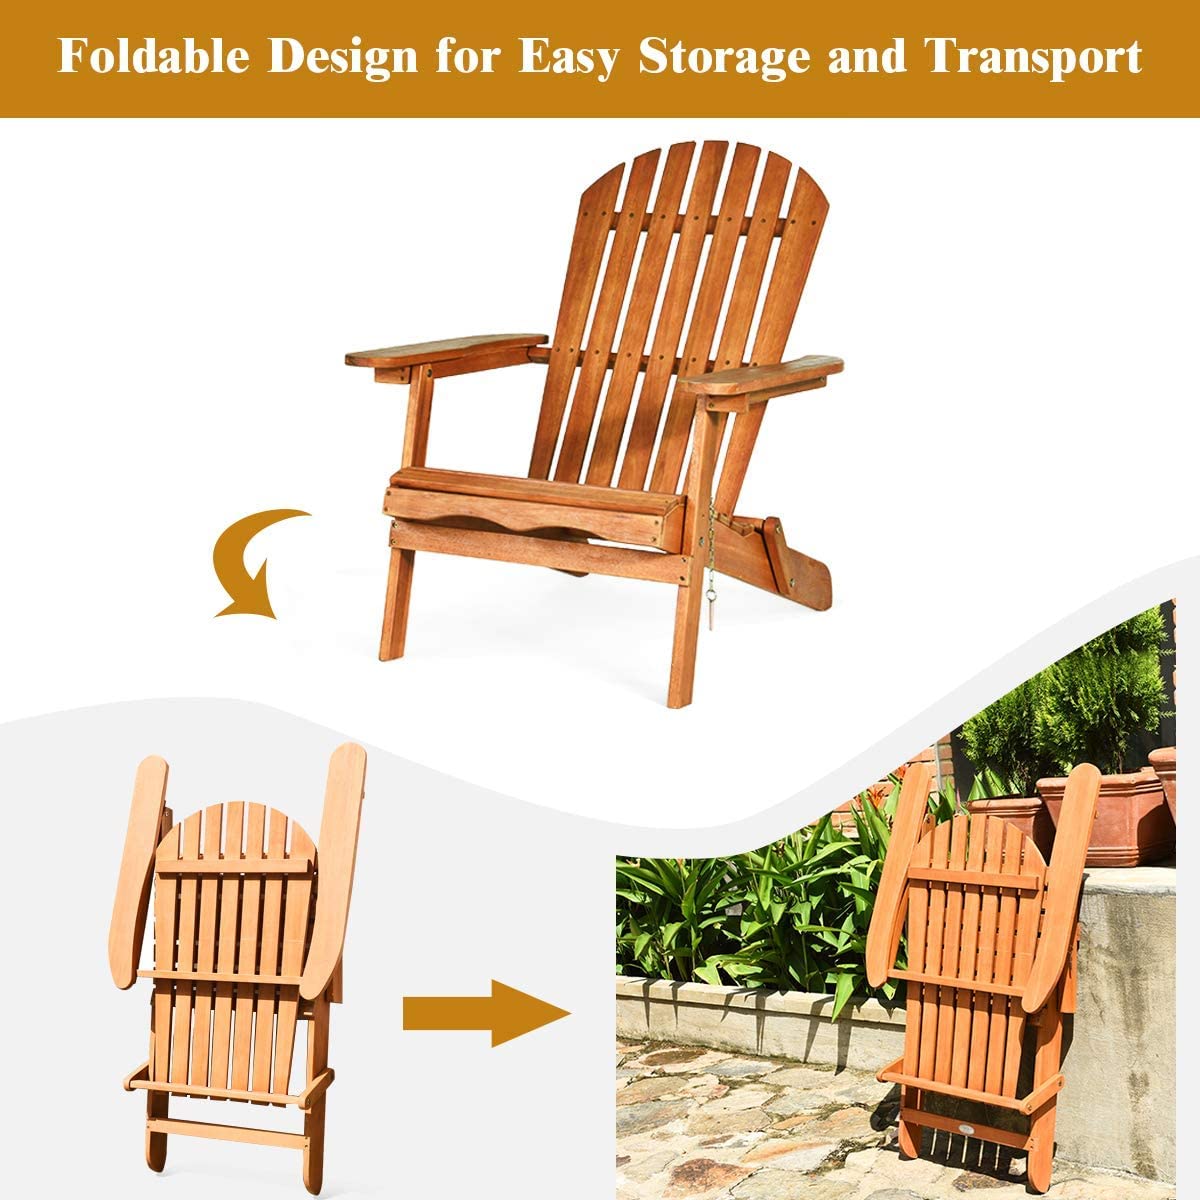 3 Pieces Foldable Adirondack Chair Set Wooden Lounger Chair with Widened Armrest and Side Table for Patio Poolside Garden